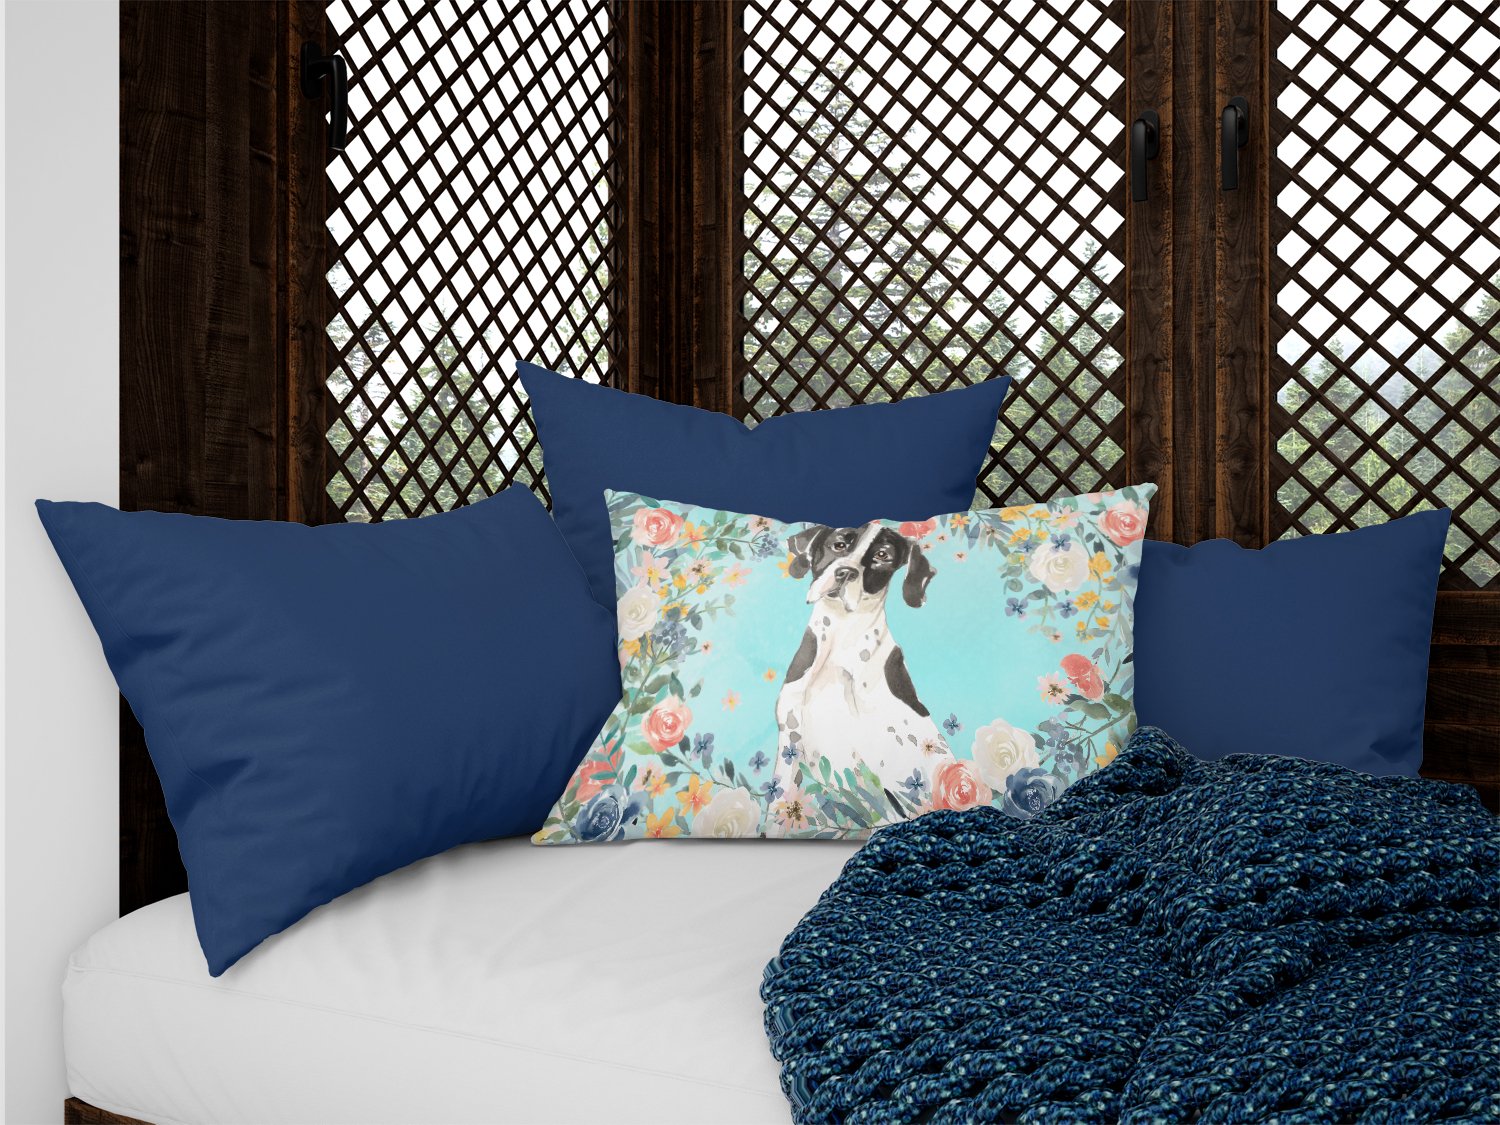 English Pointer Canvas Fabric Decorative Pillow CK3427PW1216 by Caroline's Treasures